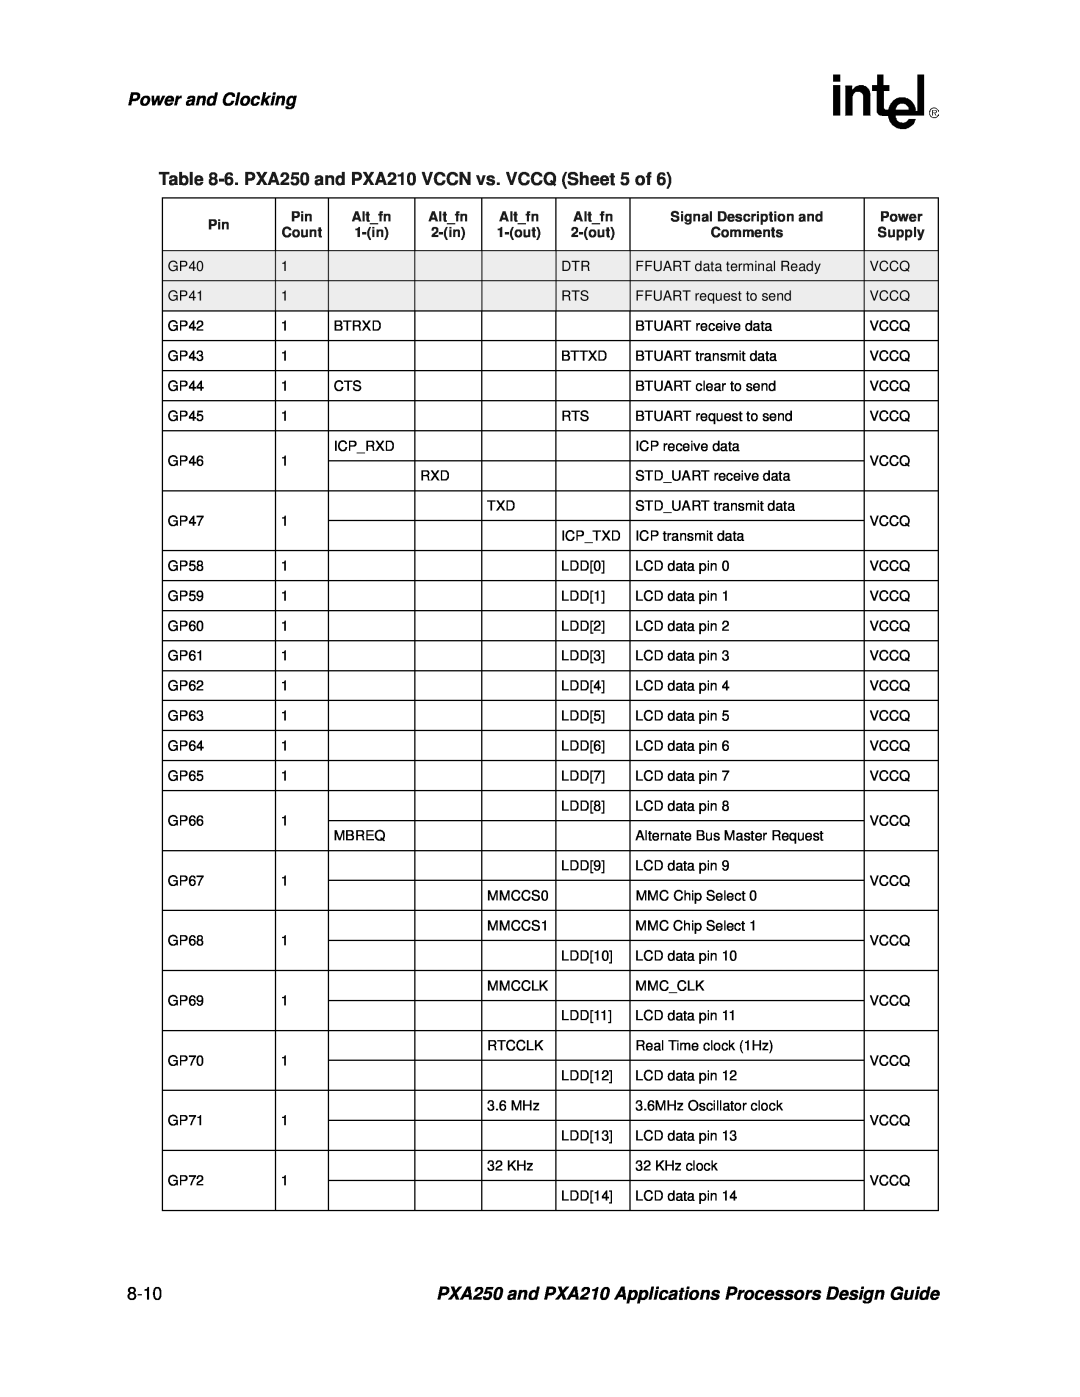 Intel manual Power and Clocking, 6. PXA250 and PXA210 VCCN vs. VCCQ Sheet 5 of 